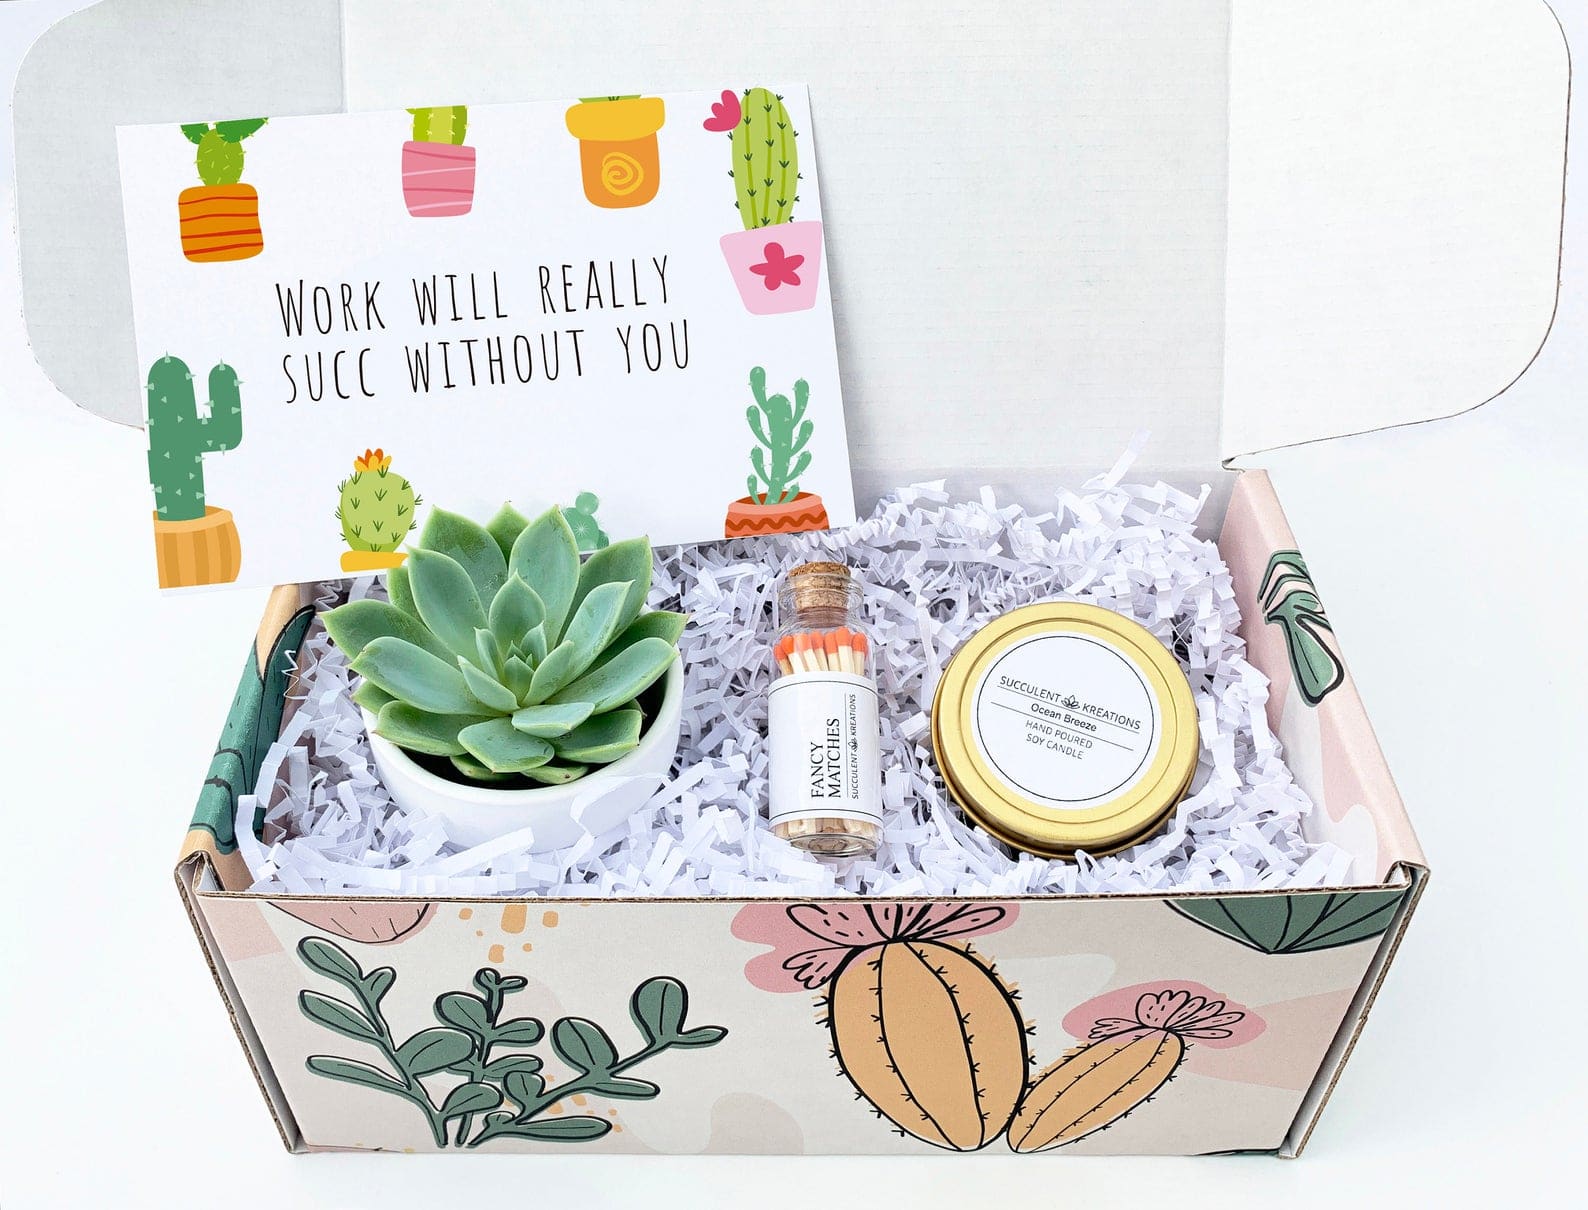 going-away-gifts-her-succulent